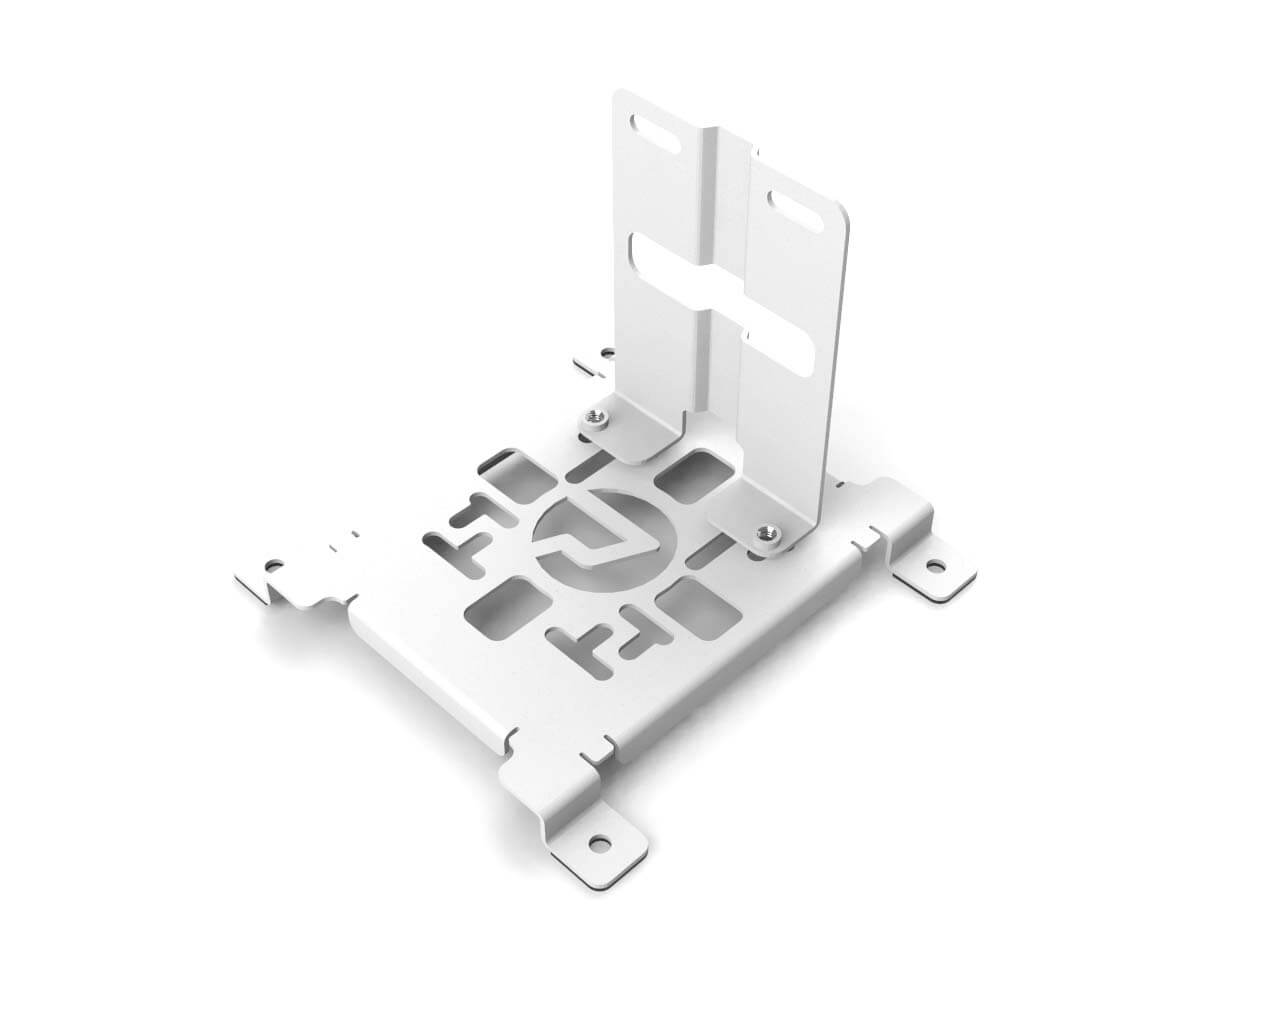 PrimoChill SX CTR2 Spider Mount Bracket Kit - 120mm Series - PrimoChill - KEEPING IT COOL Sky White